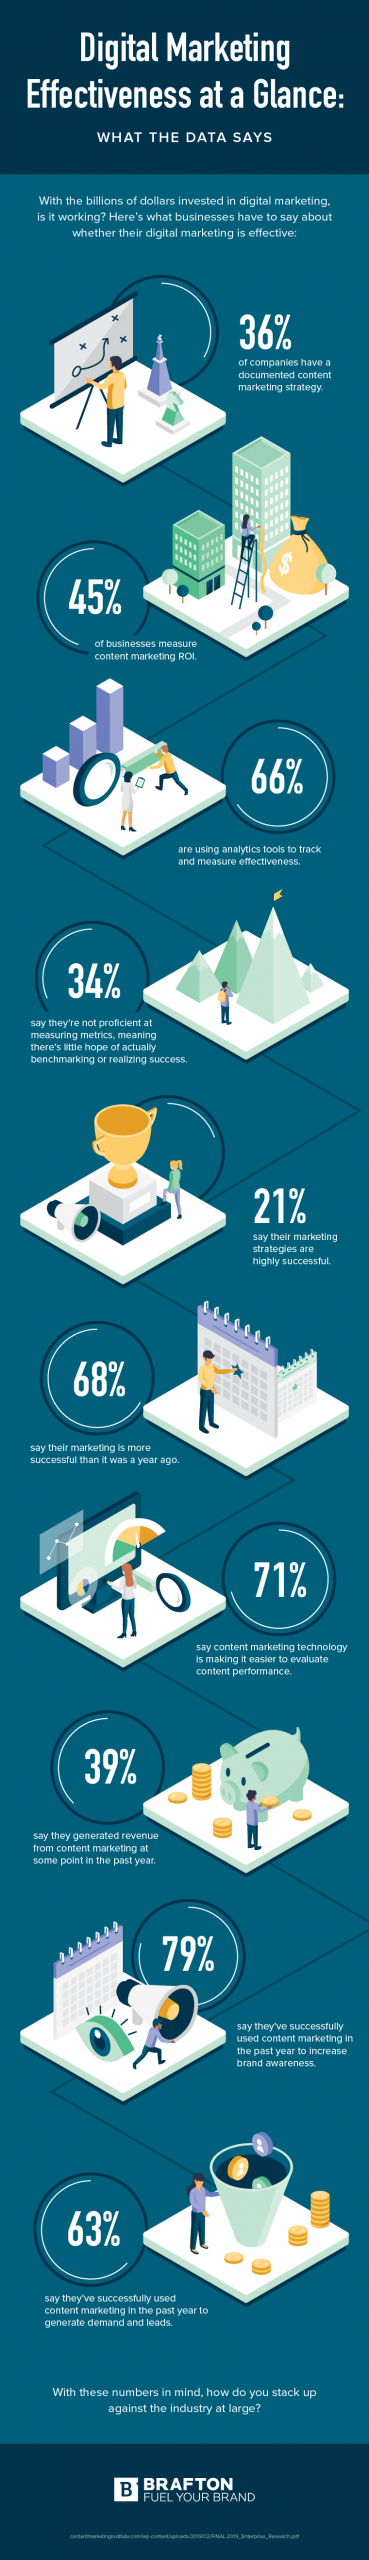 How to measure digital marketing effectiveness infographic